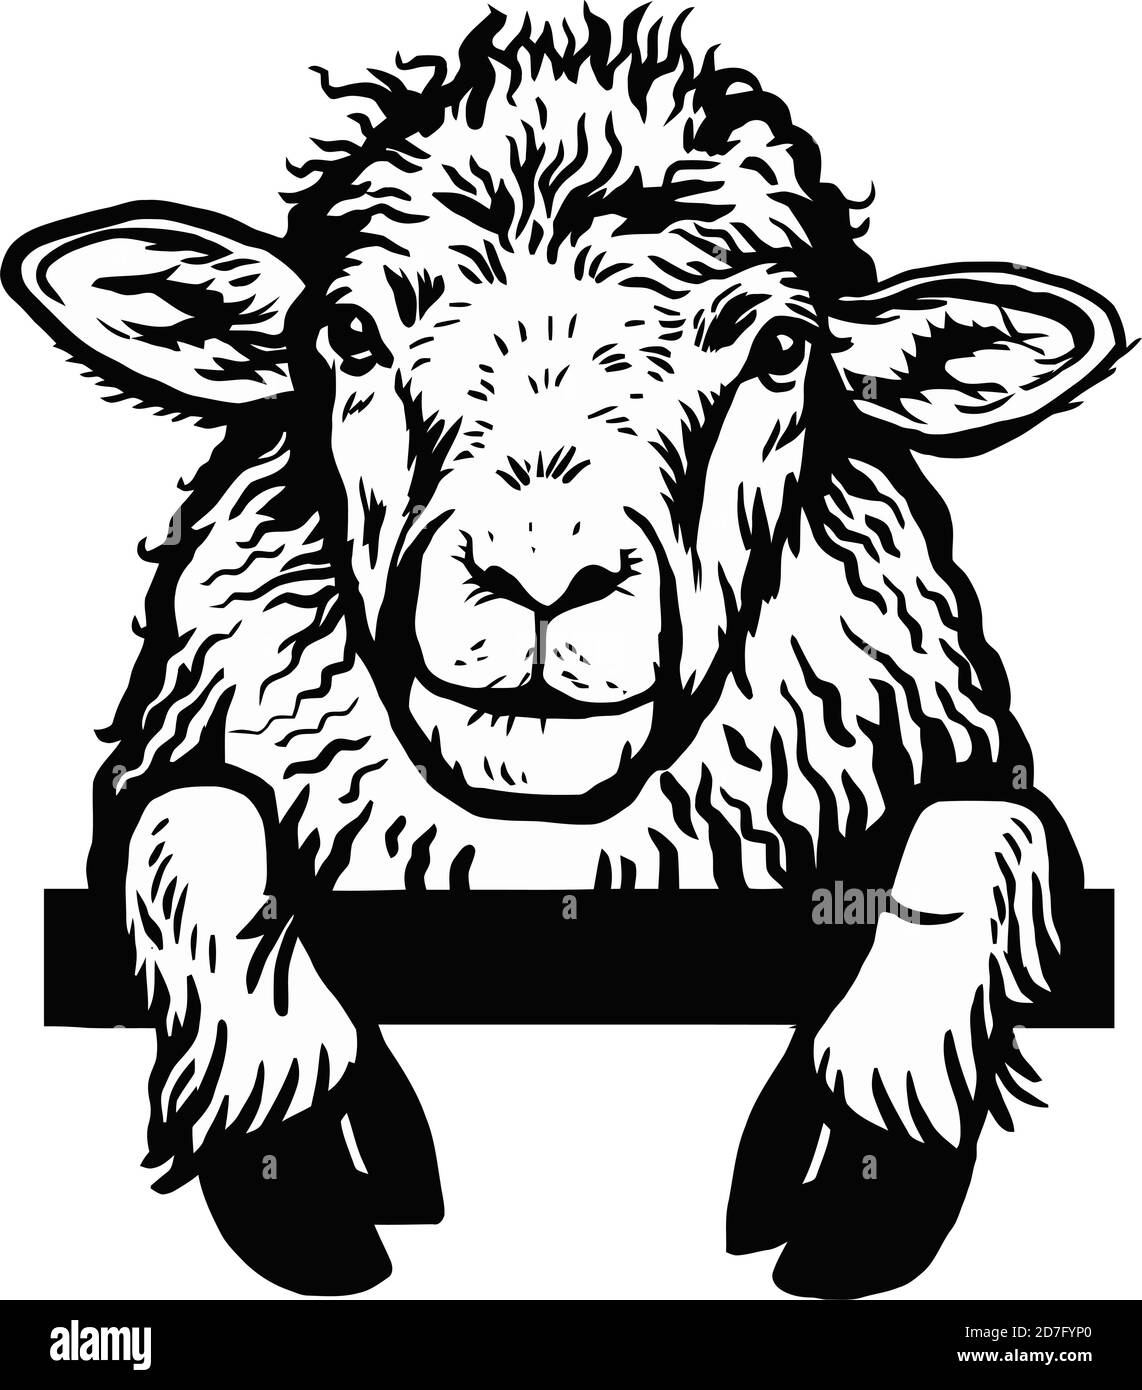 Peeking Sheep head. Hand drawn in a graphic style. Vintage vector engraving illustration for label, poster, logotype. Isolated on white Stock Vector